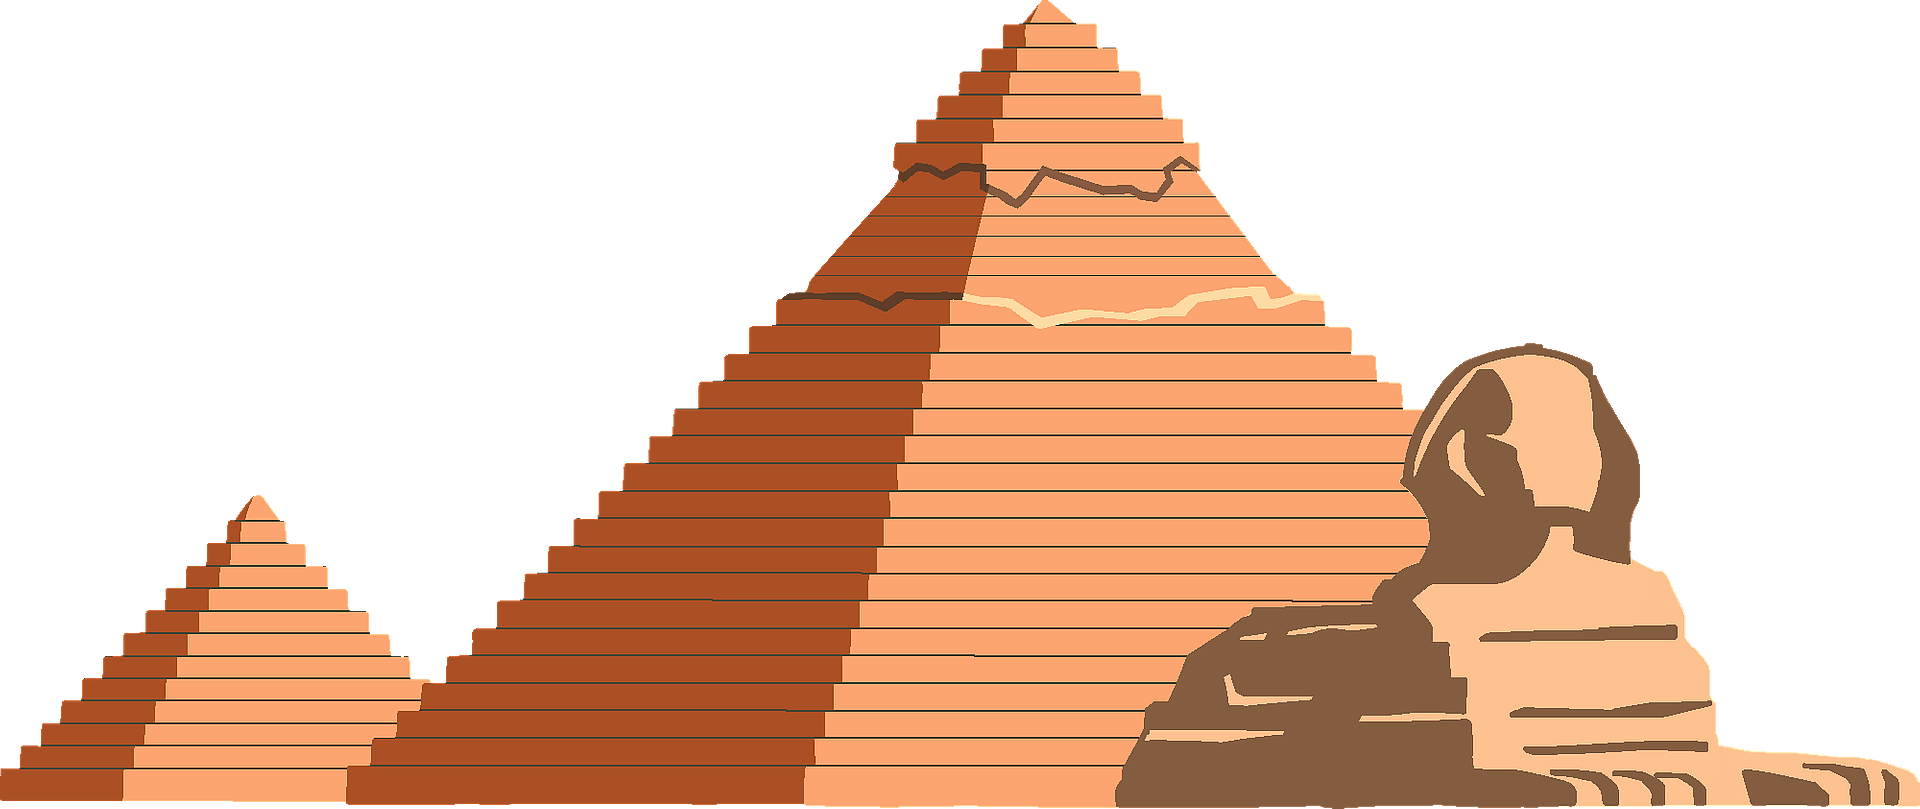 Egyptian pyramid clipart design illustration 9391125 PNG - Clip Art Library